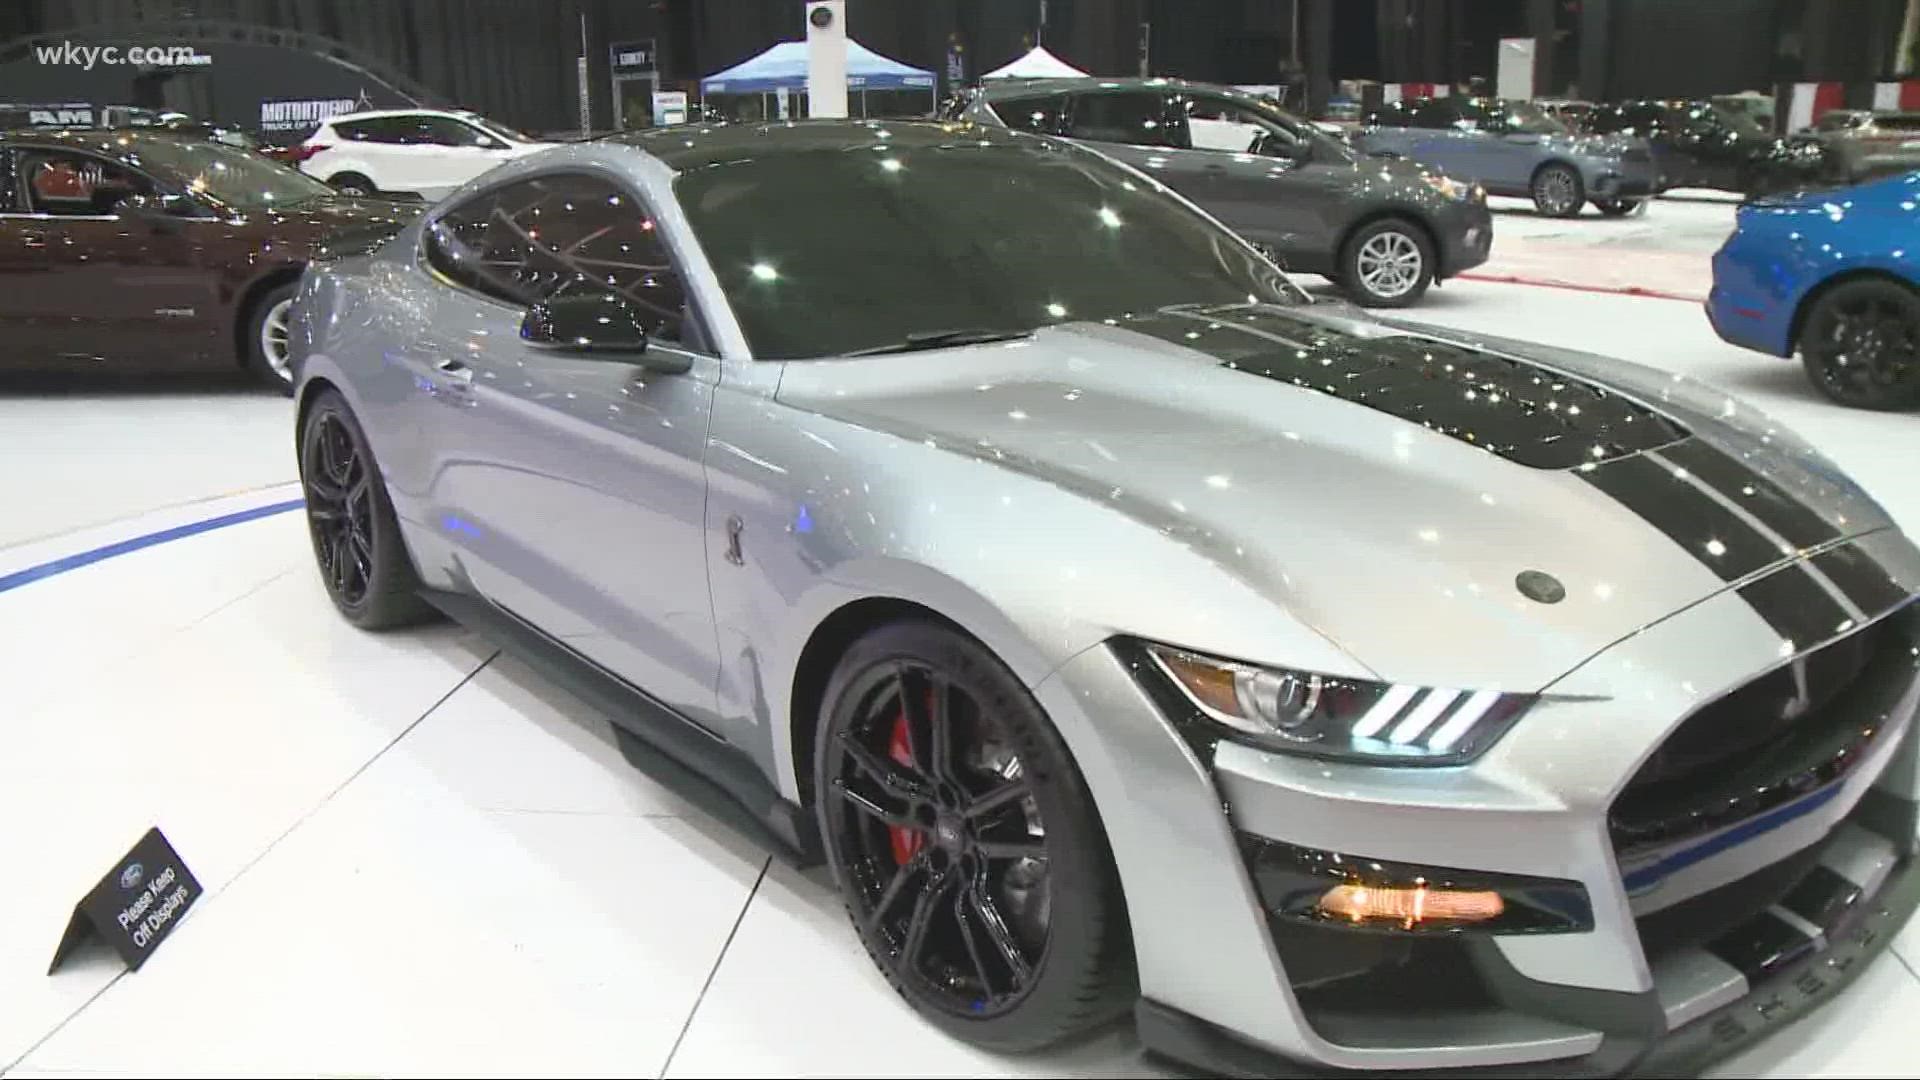 Ix Center Schedule 2022 When Is The 2022 Cleveland Auto Show At I-X Center? | Wkyc.com